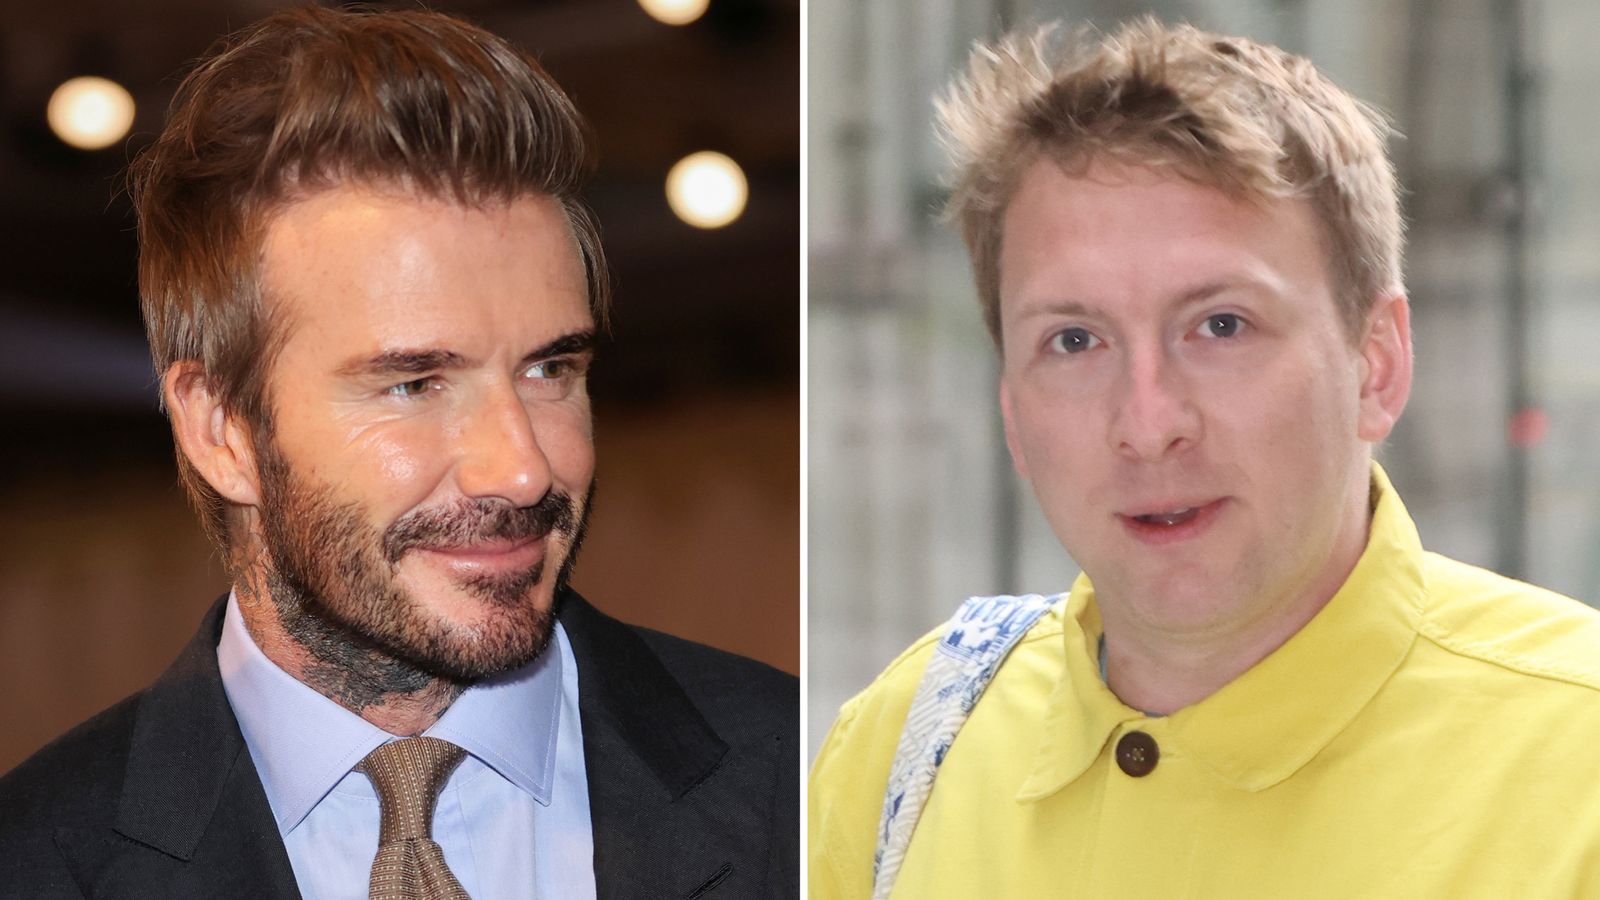 Will Joe Lycett shred £10,000 today over David Beckham's controversial Qatar World Cup deal?